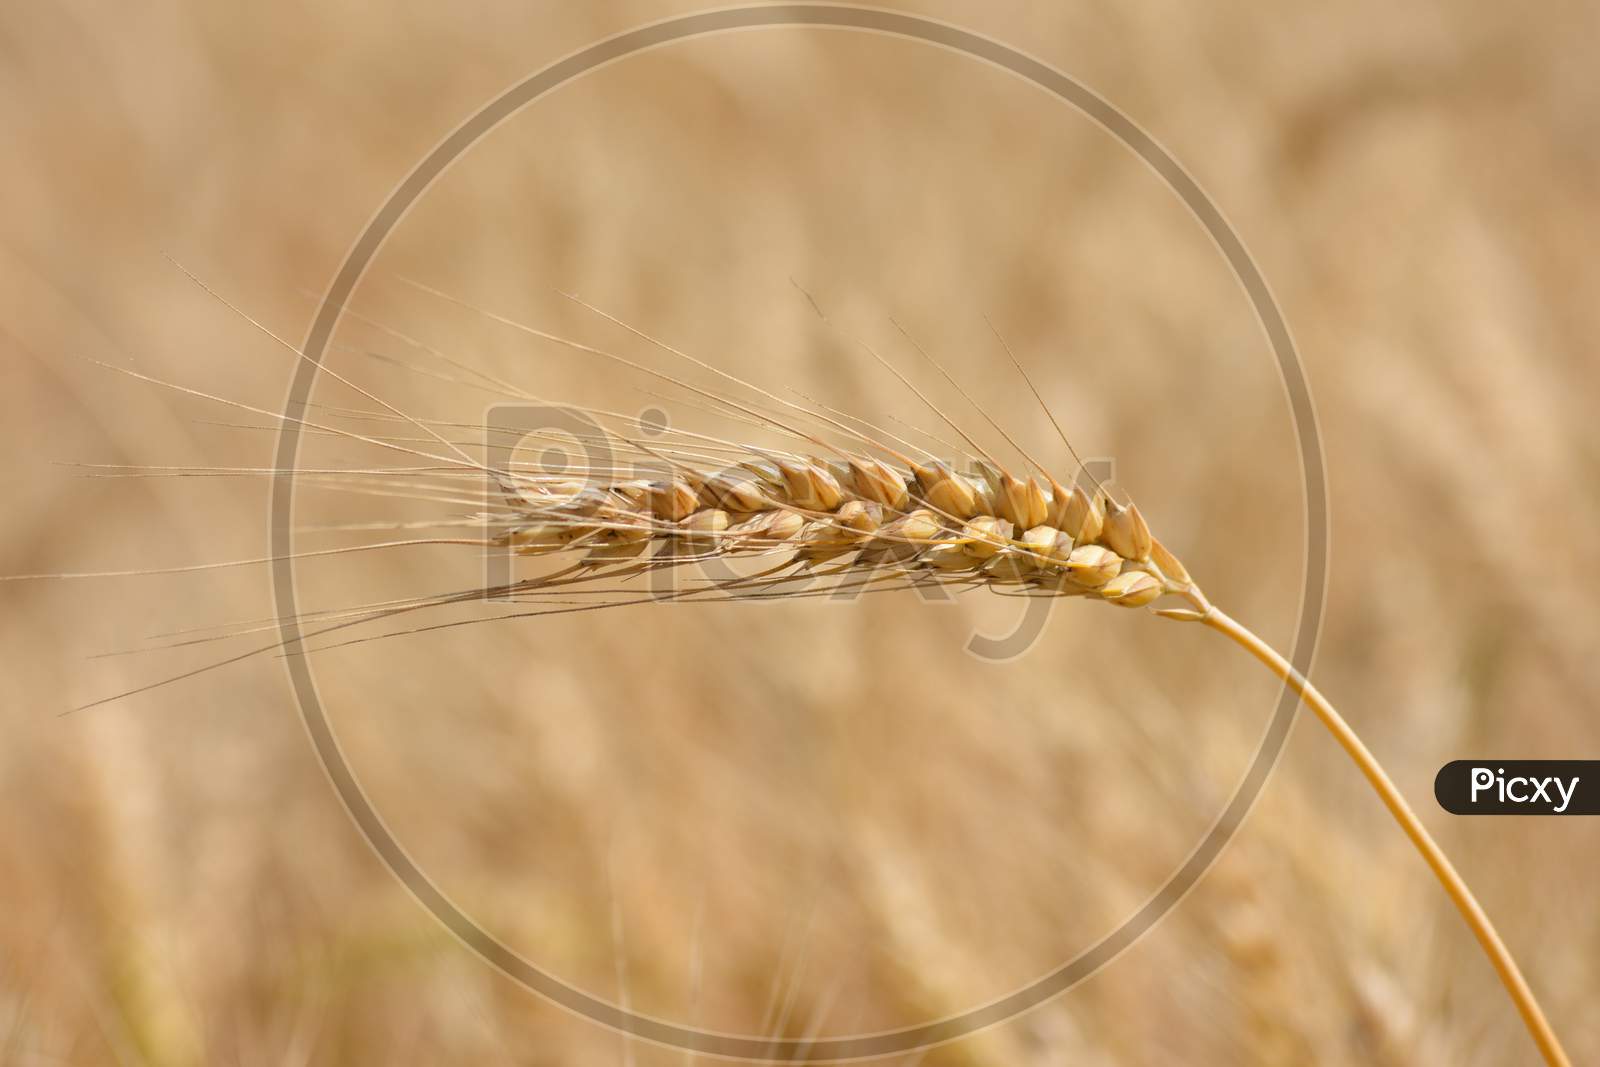 Closeup of ears of golden wheat on the field